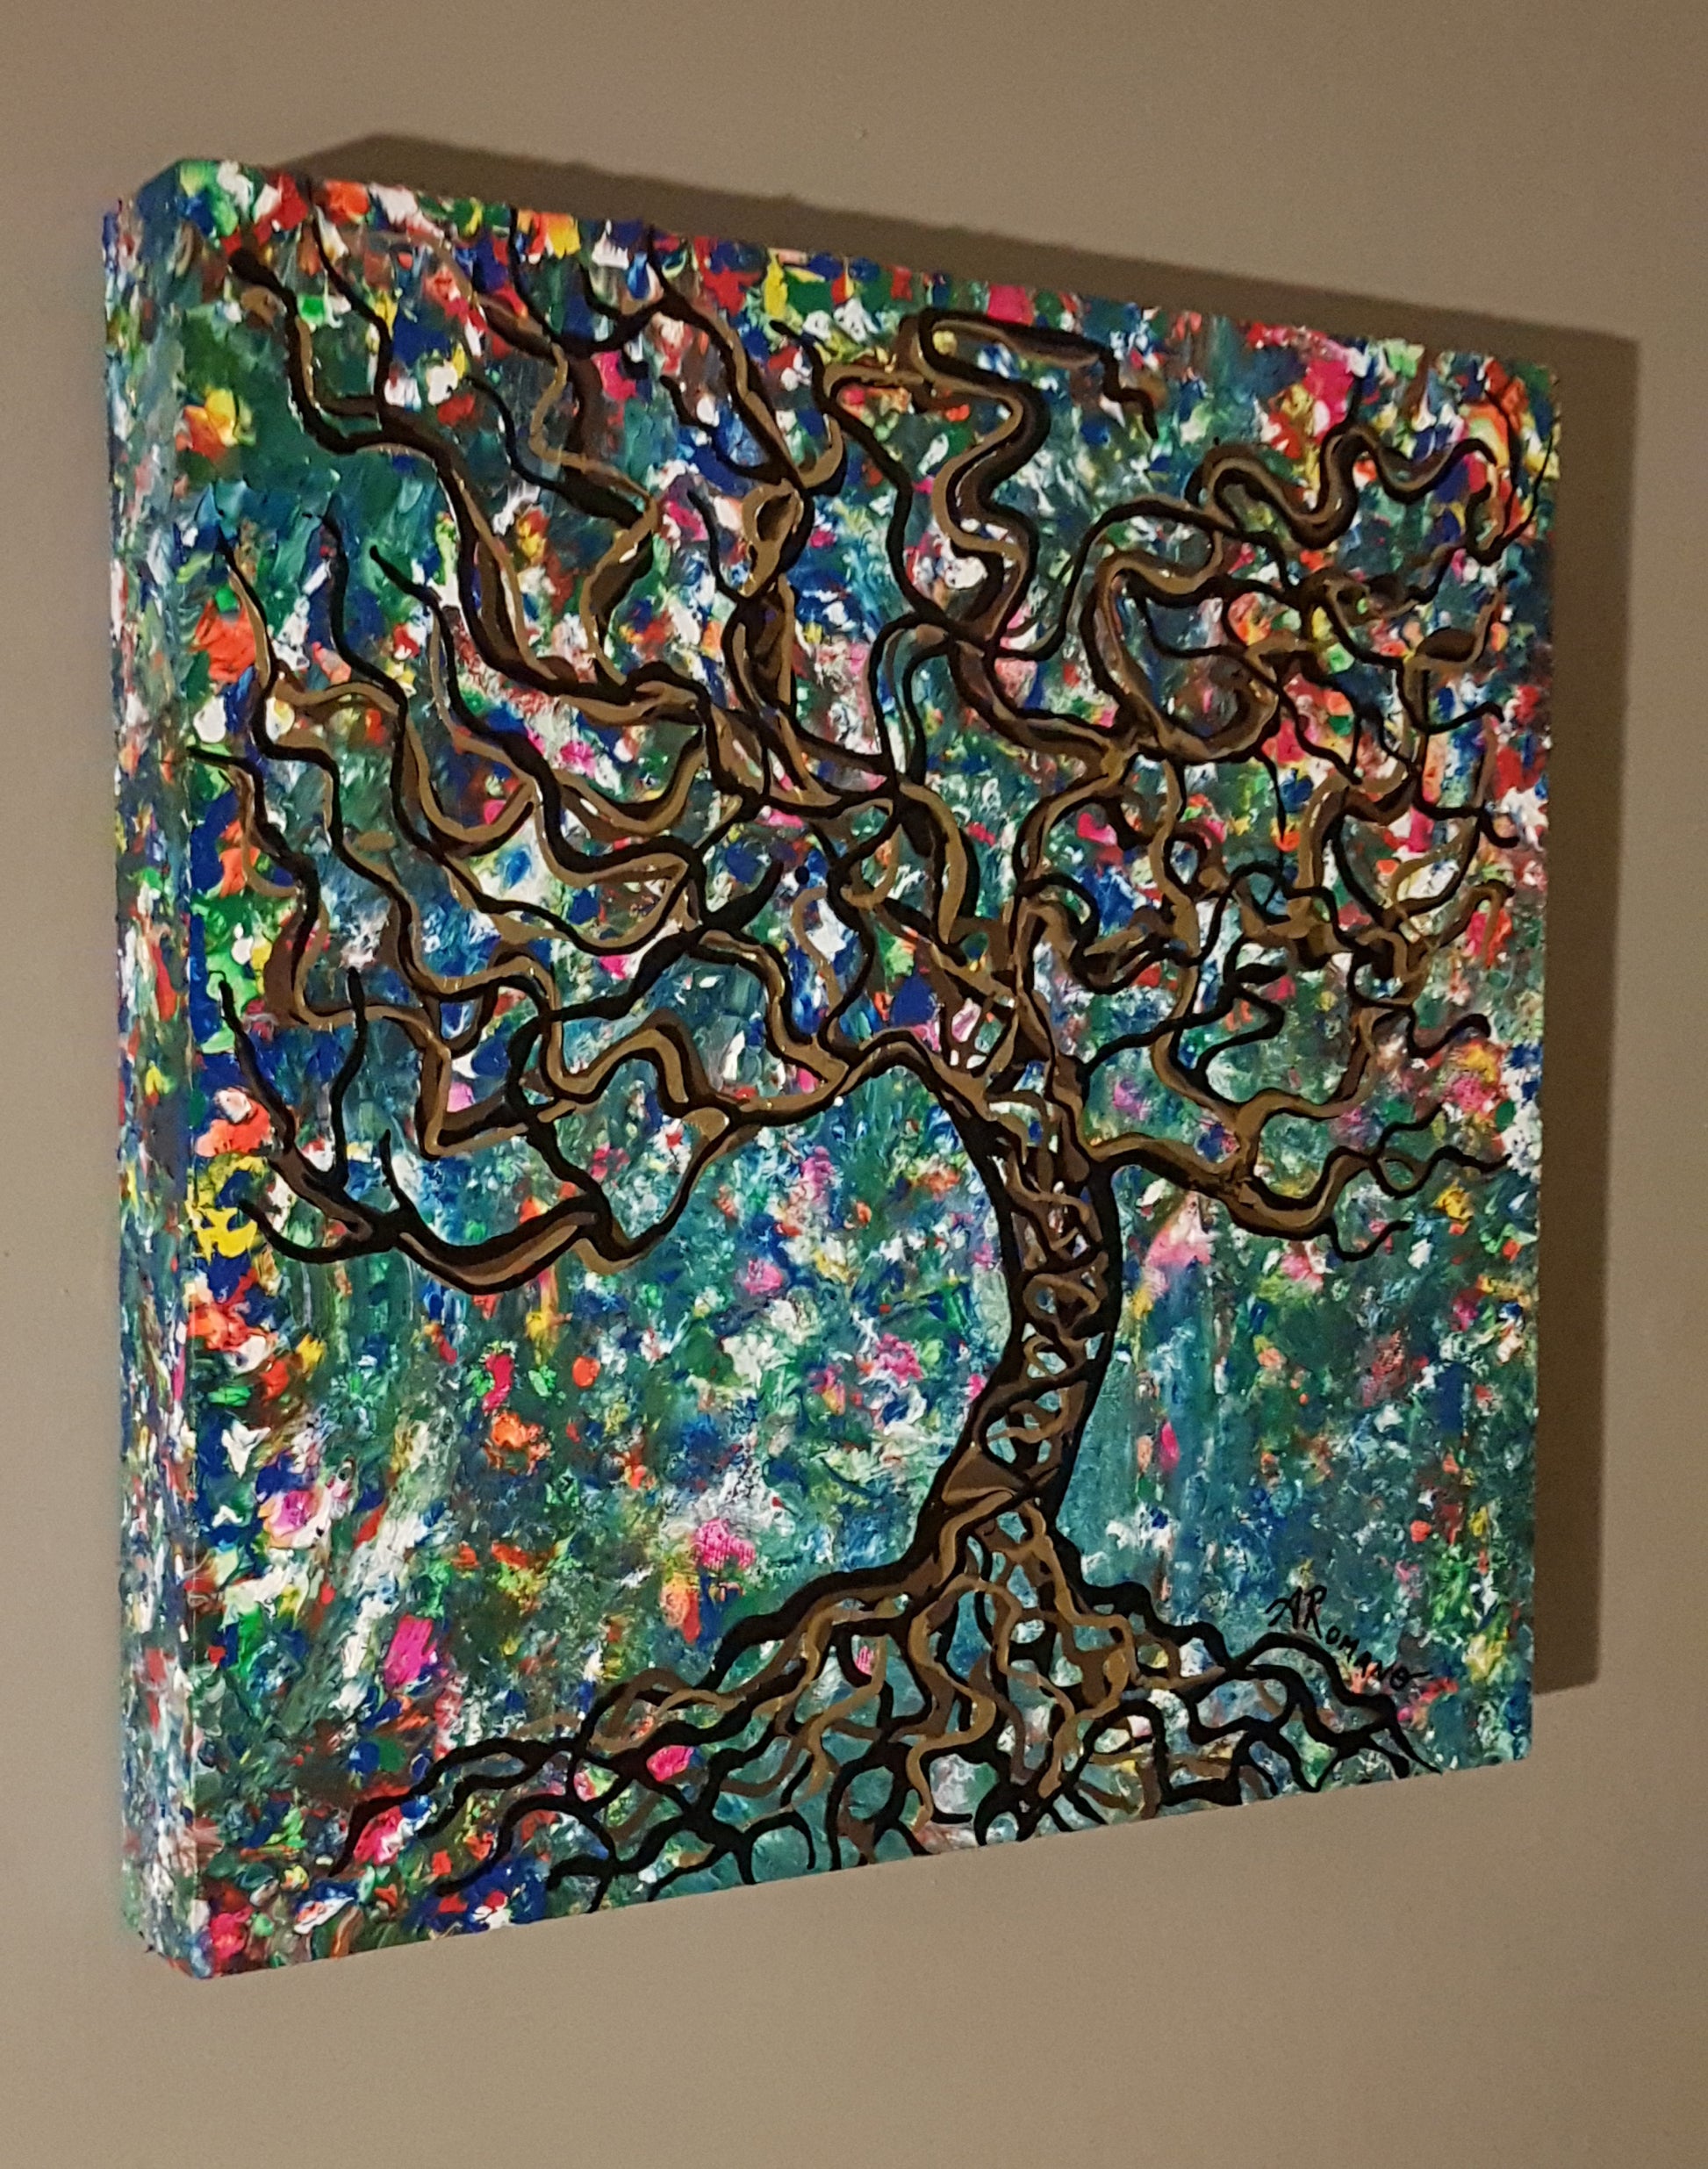 Roots-by-Alexandra-Romano-Art-Original-Whimsical-Textured-Tree-Branches-Painting-Gold-Black-Blue-Green-Colorful-Unique-Mixed-Media-Art